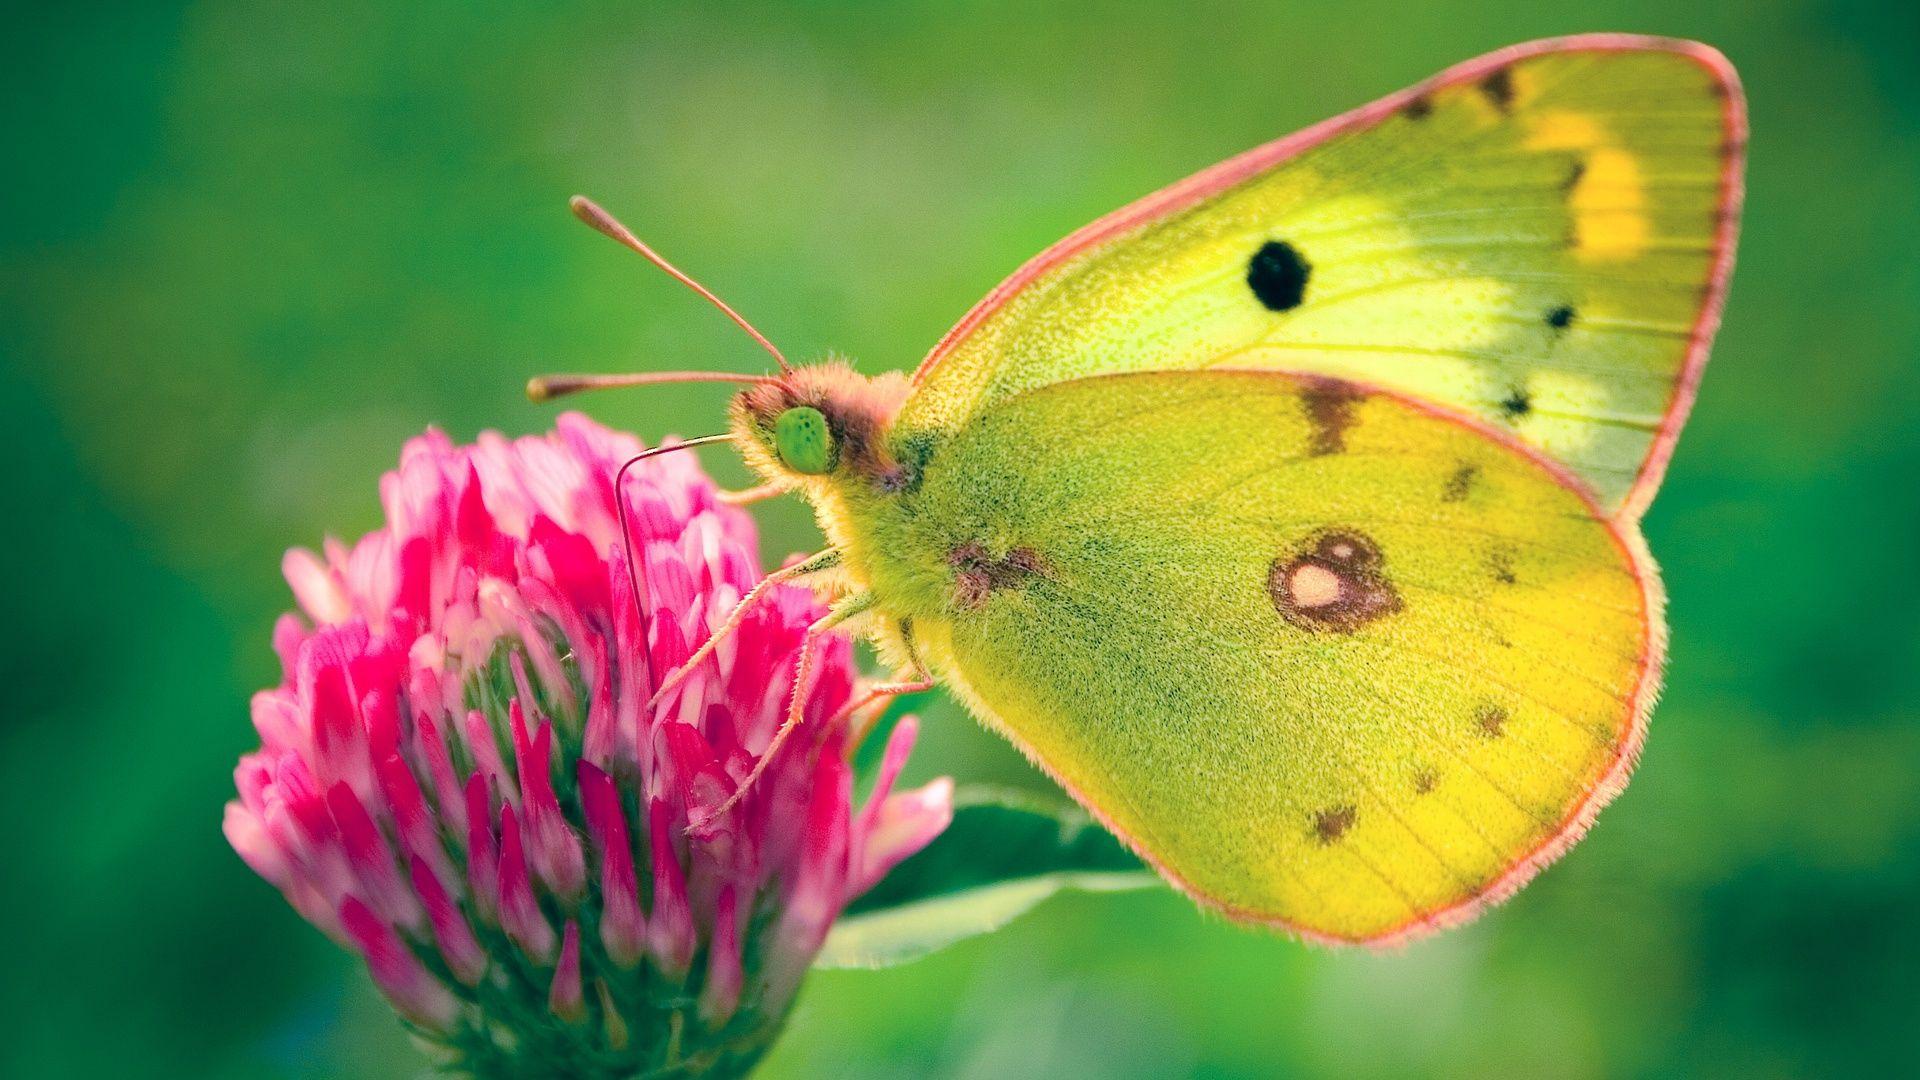 Butterfly image wallpaper download